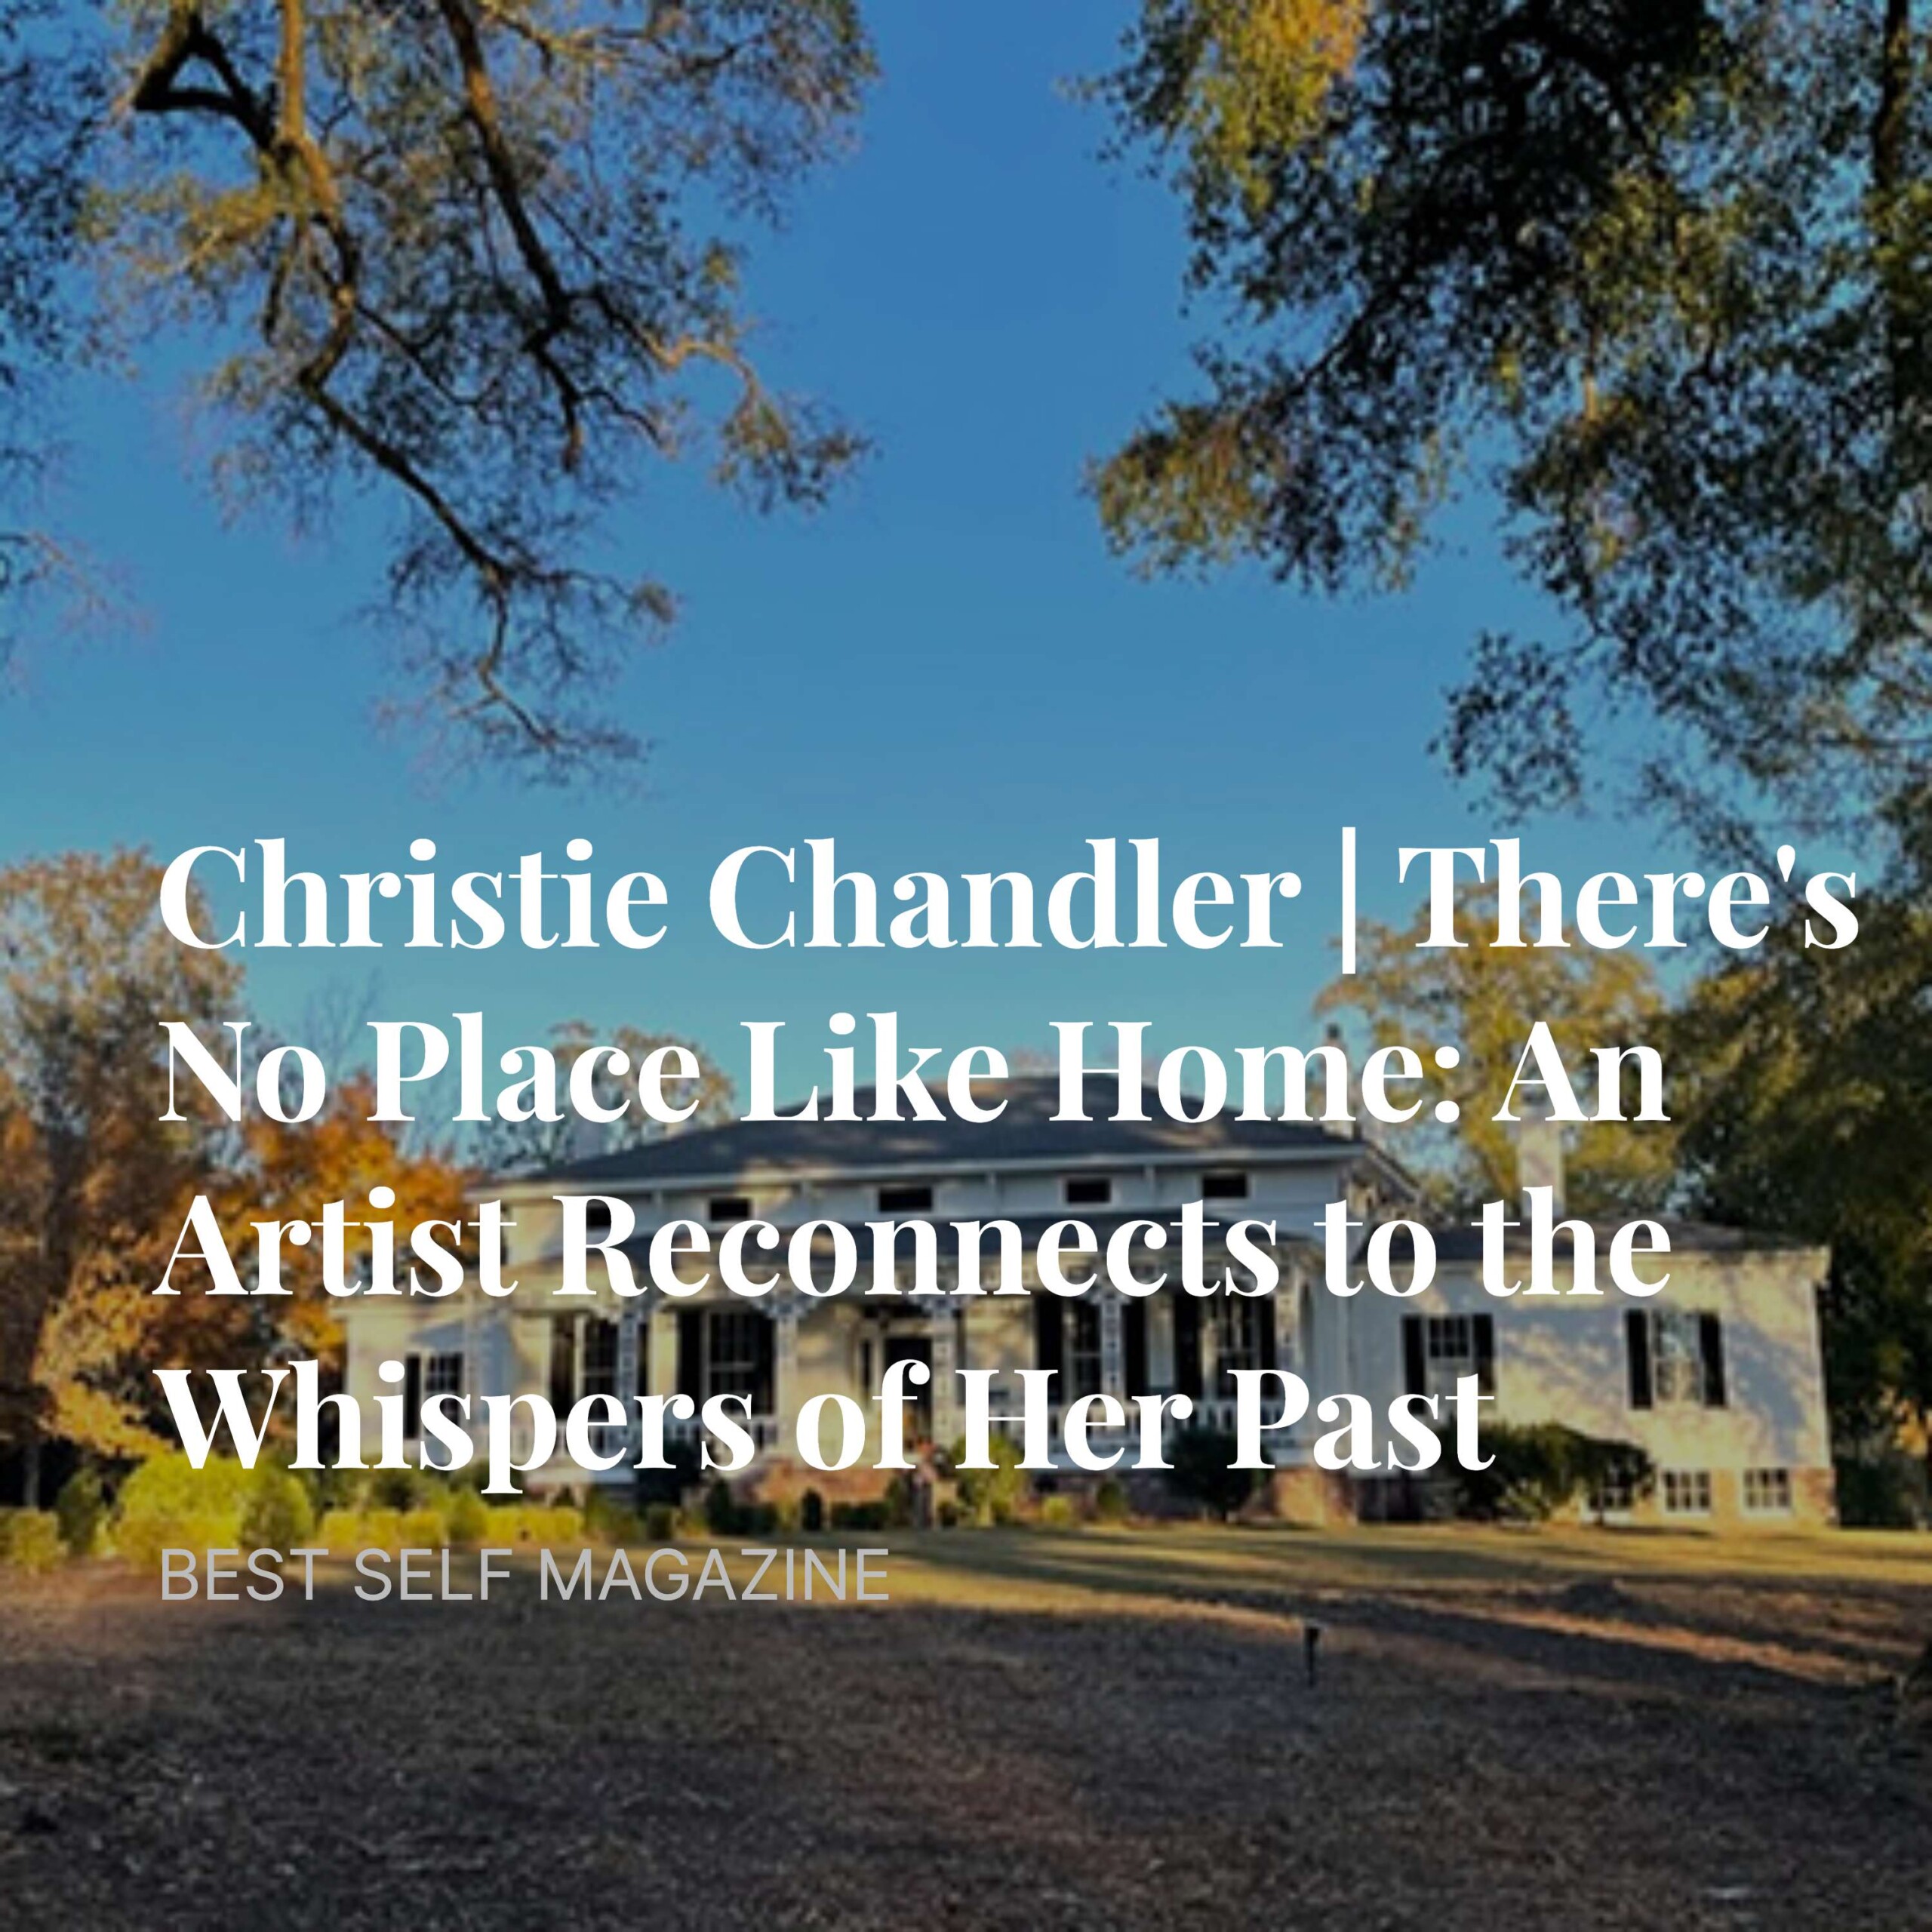 Podcast: Christie Chandler | There’s No Place Like Home: An Artist Reconnects to the Whispers of Her Past